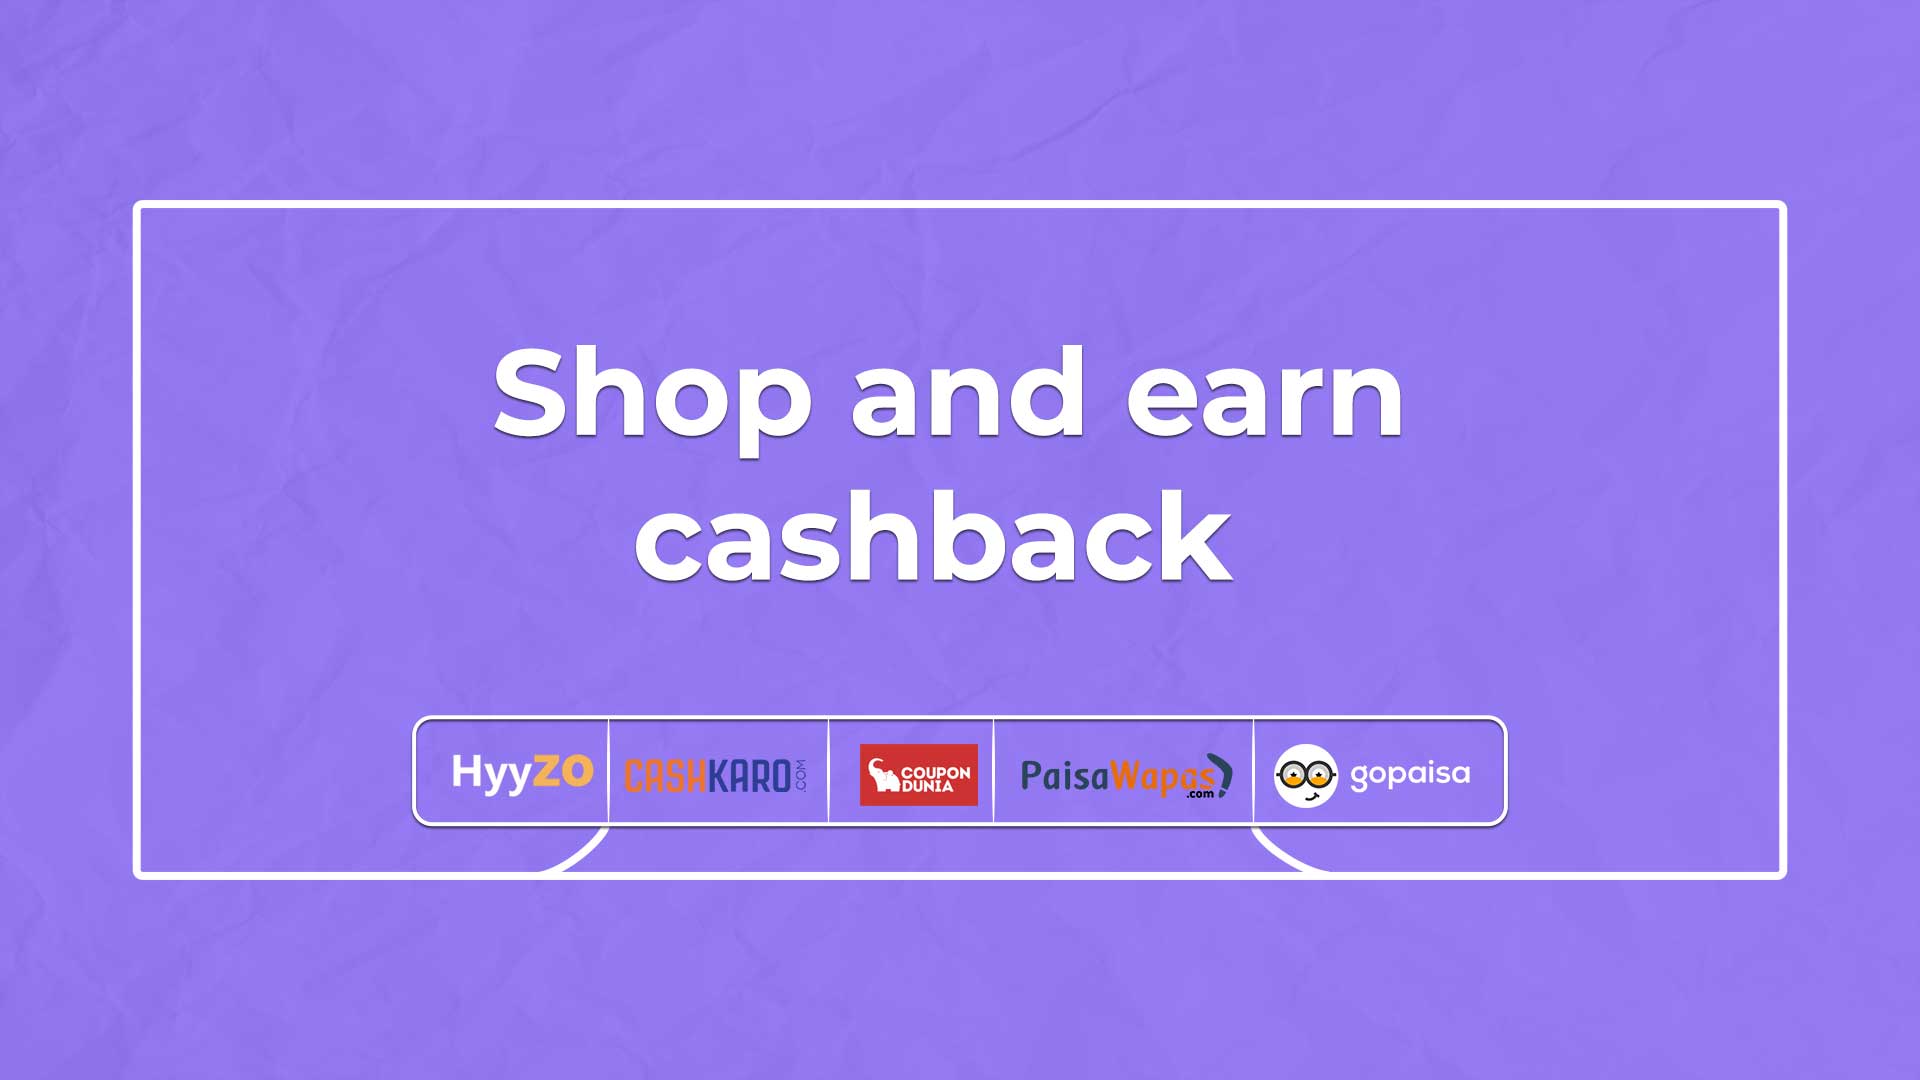 Shop and earn cashback